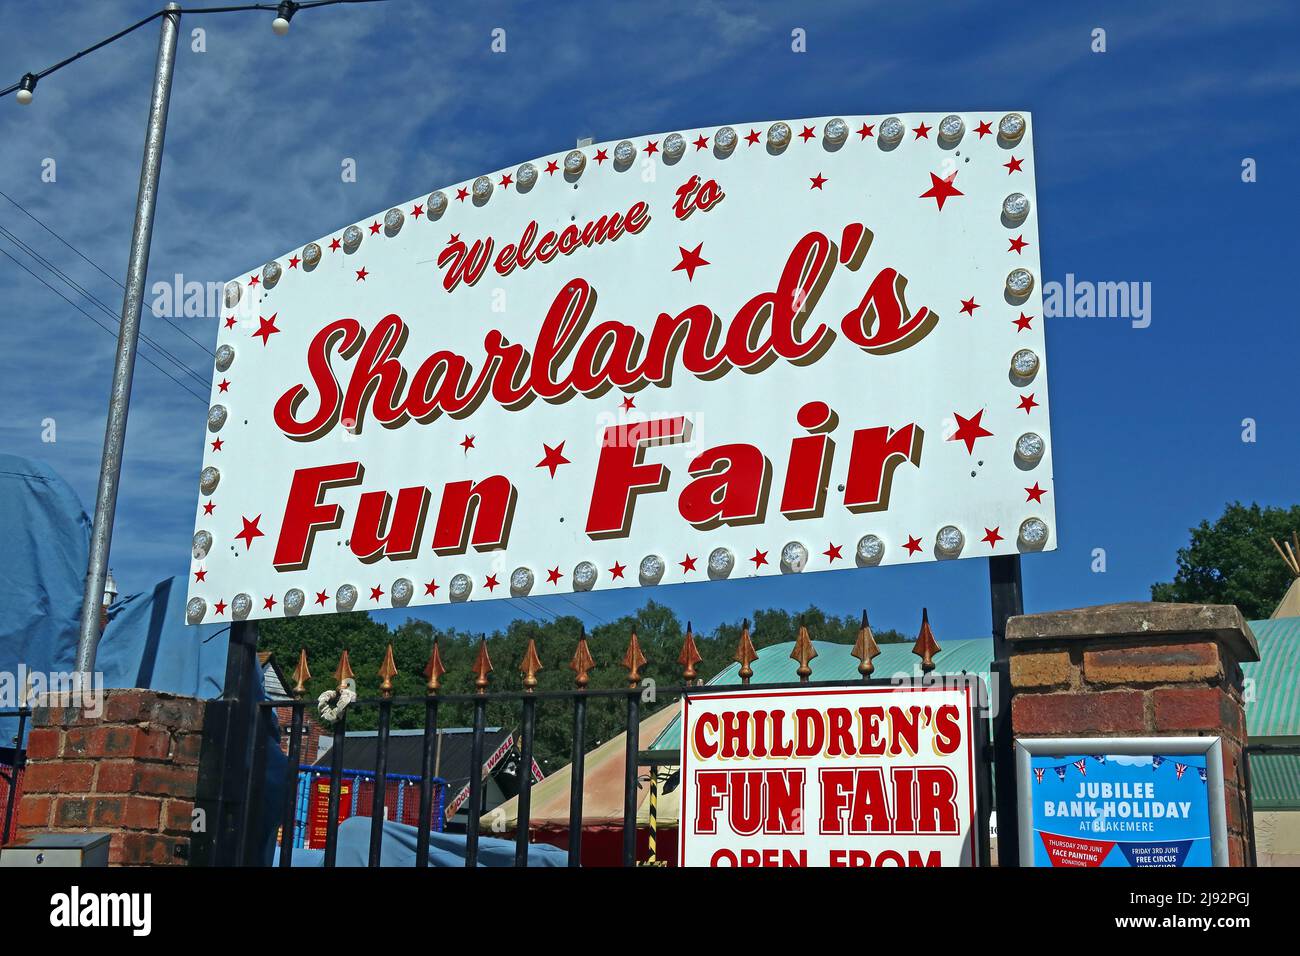 Welcome to Harry Sharlands Fun Fair sign, Blakemere Village, Chester Rd, Northwich, Cheshire,England, UK, CW8 2EB - Children's Fun Fair Stock Photo